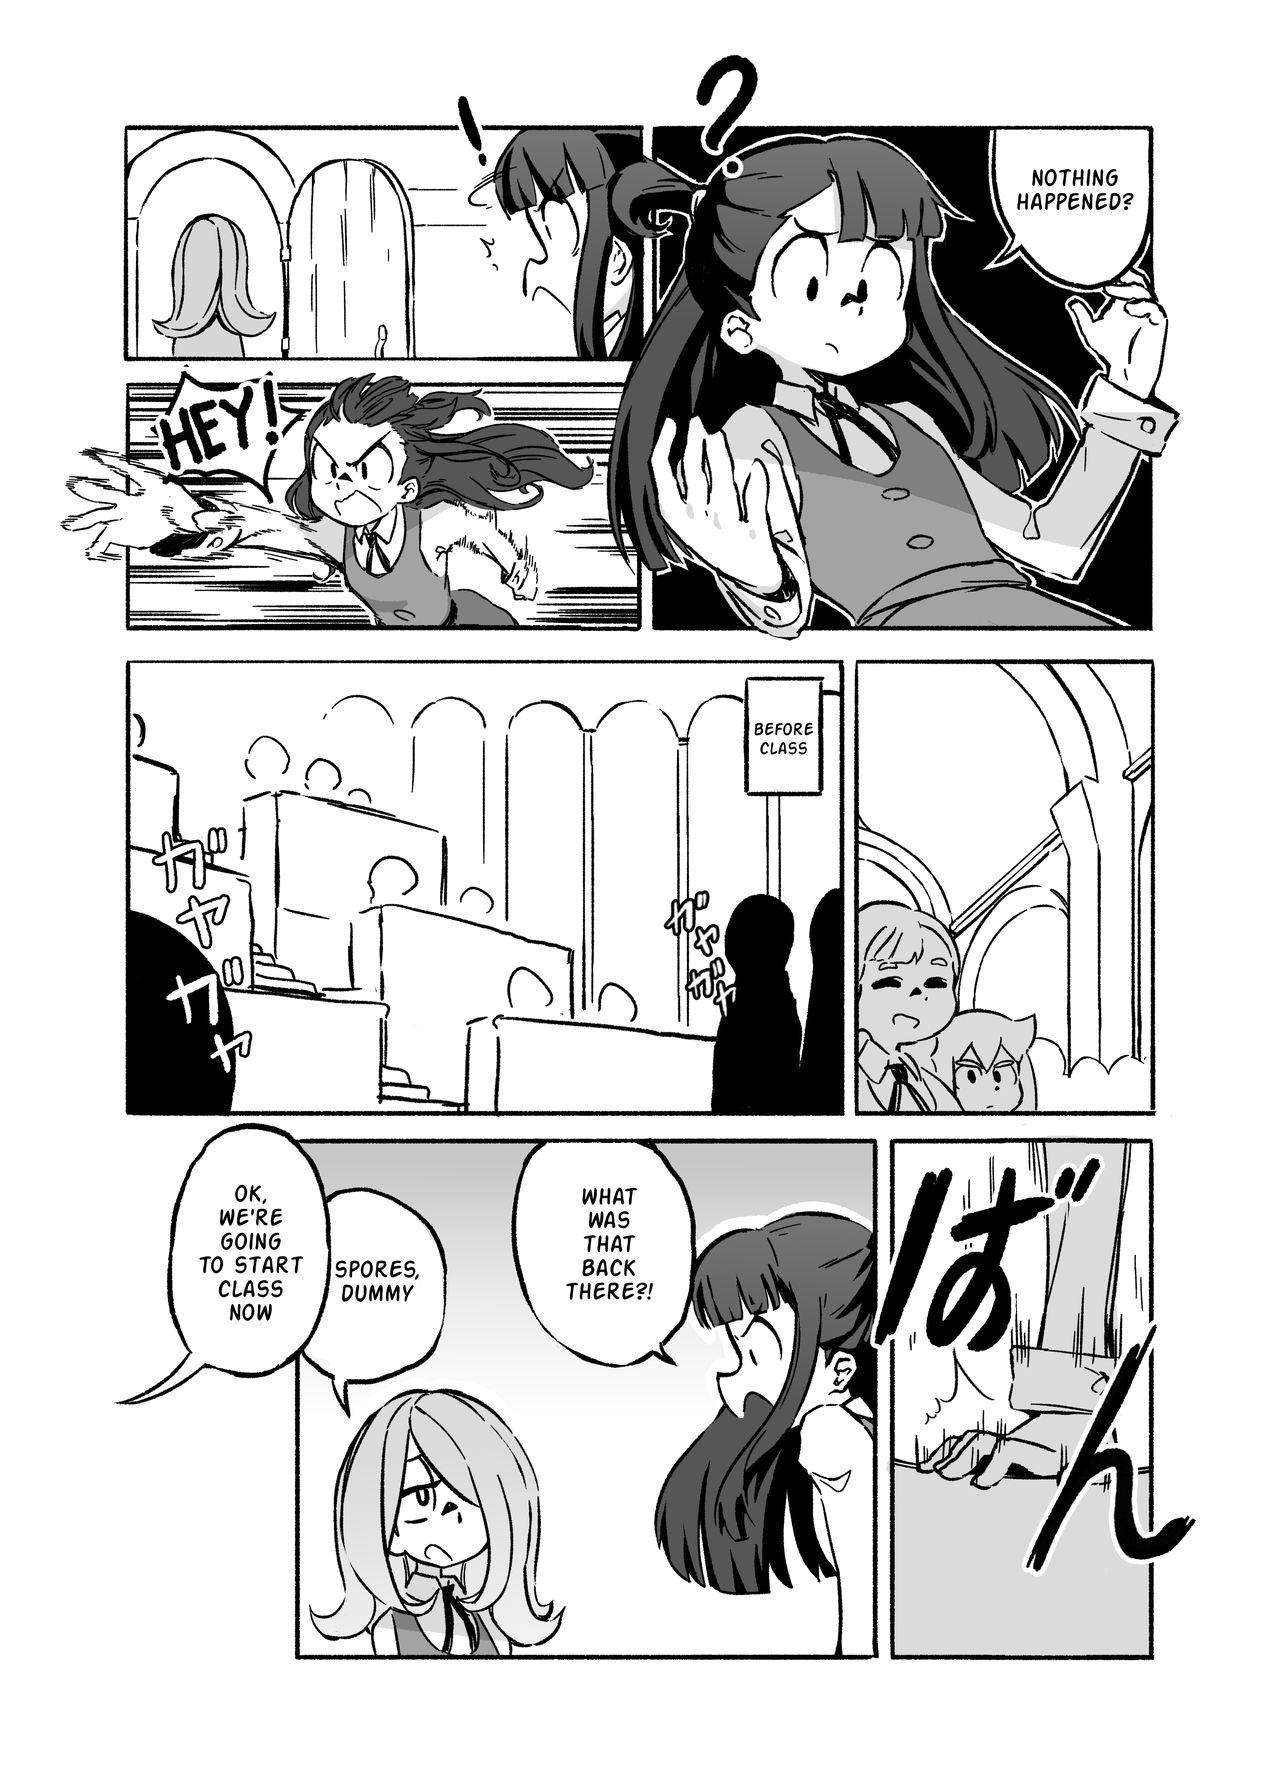 Massages Mushroom Fever - Little witch academia Short - Page 6